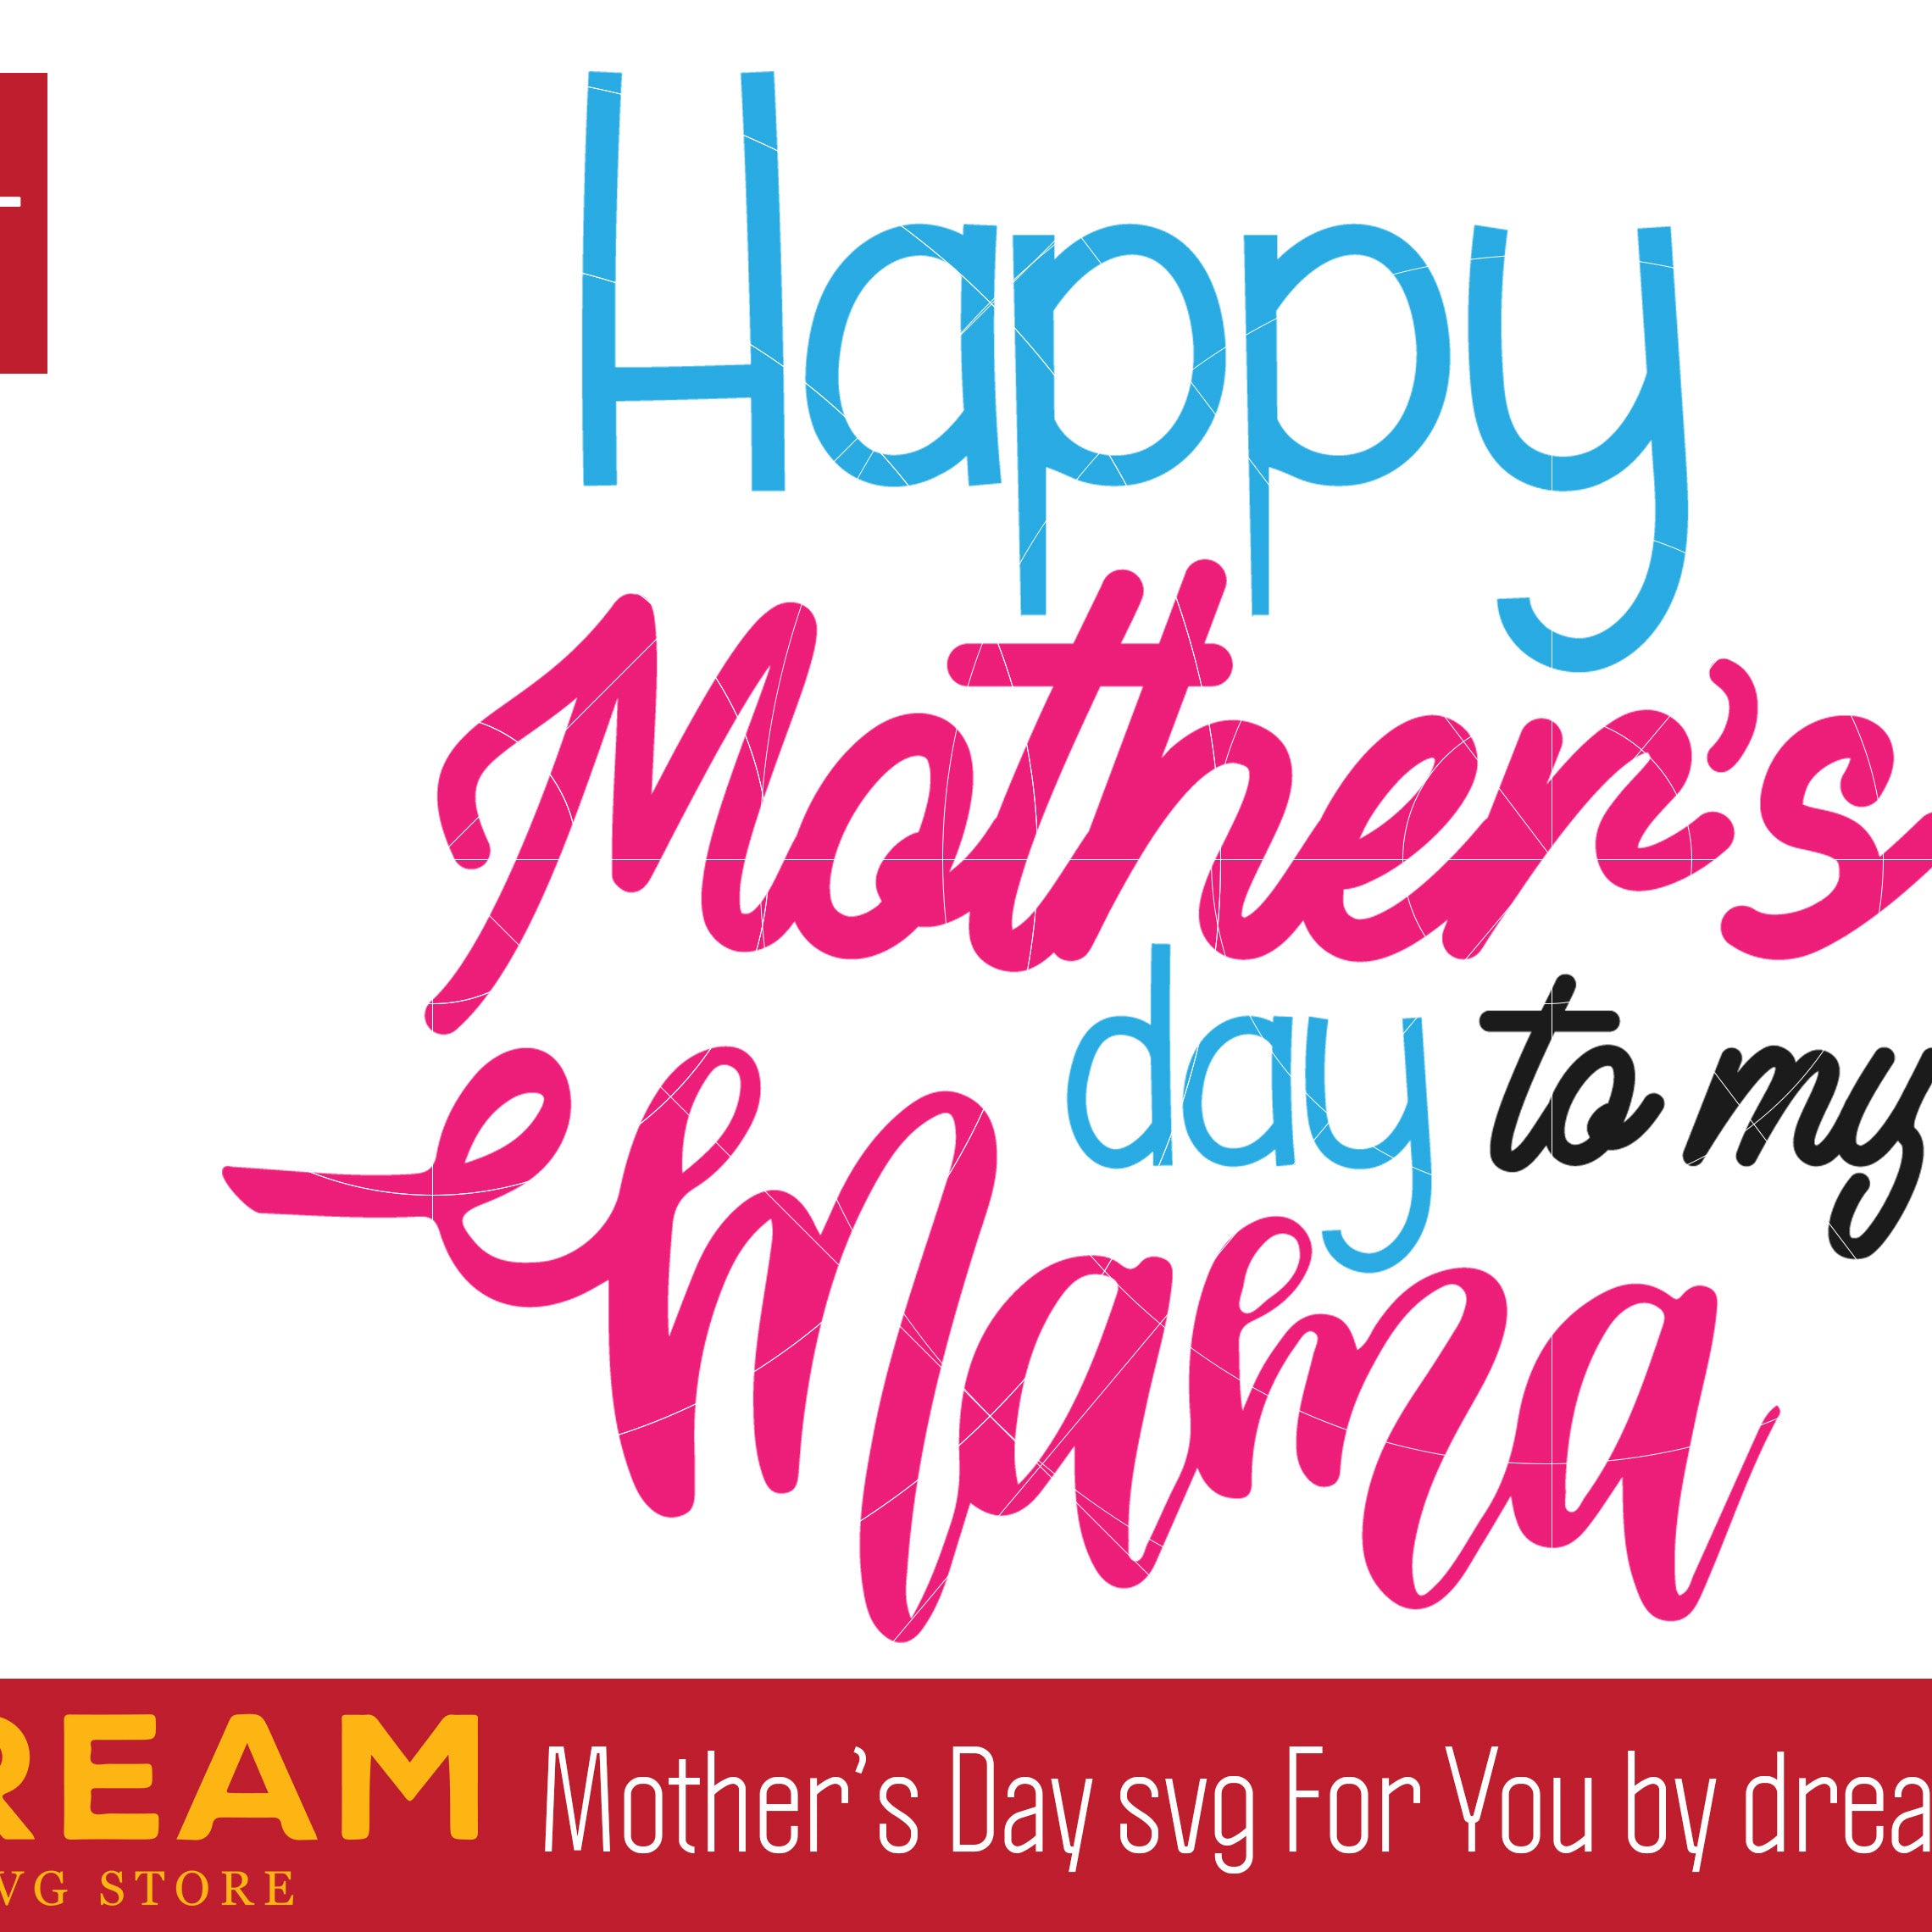 Happy mothers day to my mama svg, Mother's day svg, eps, png, dxf